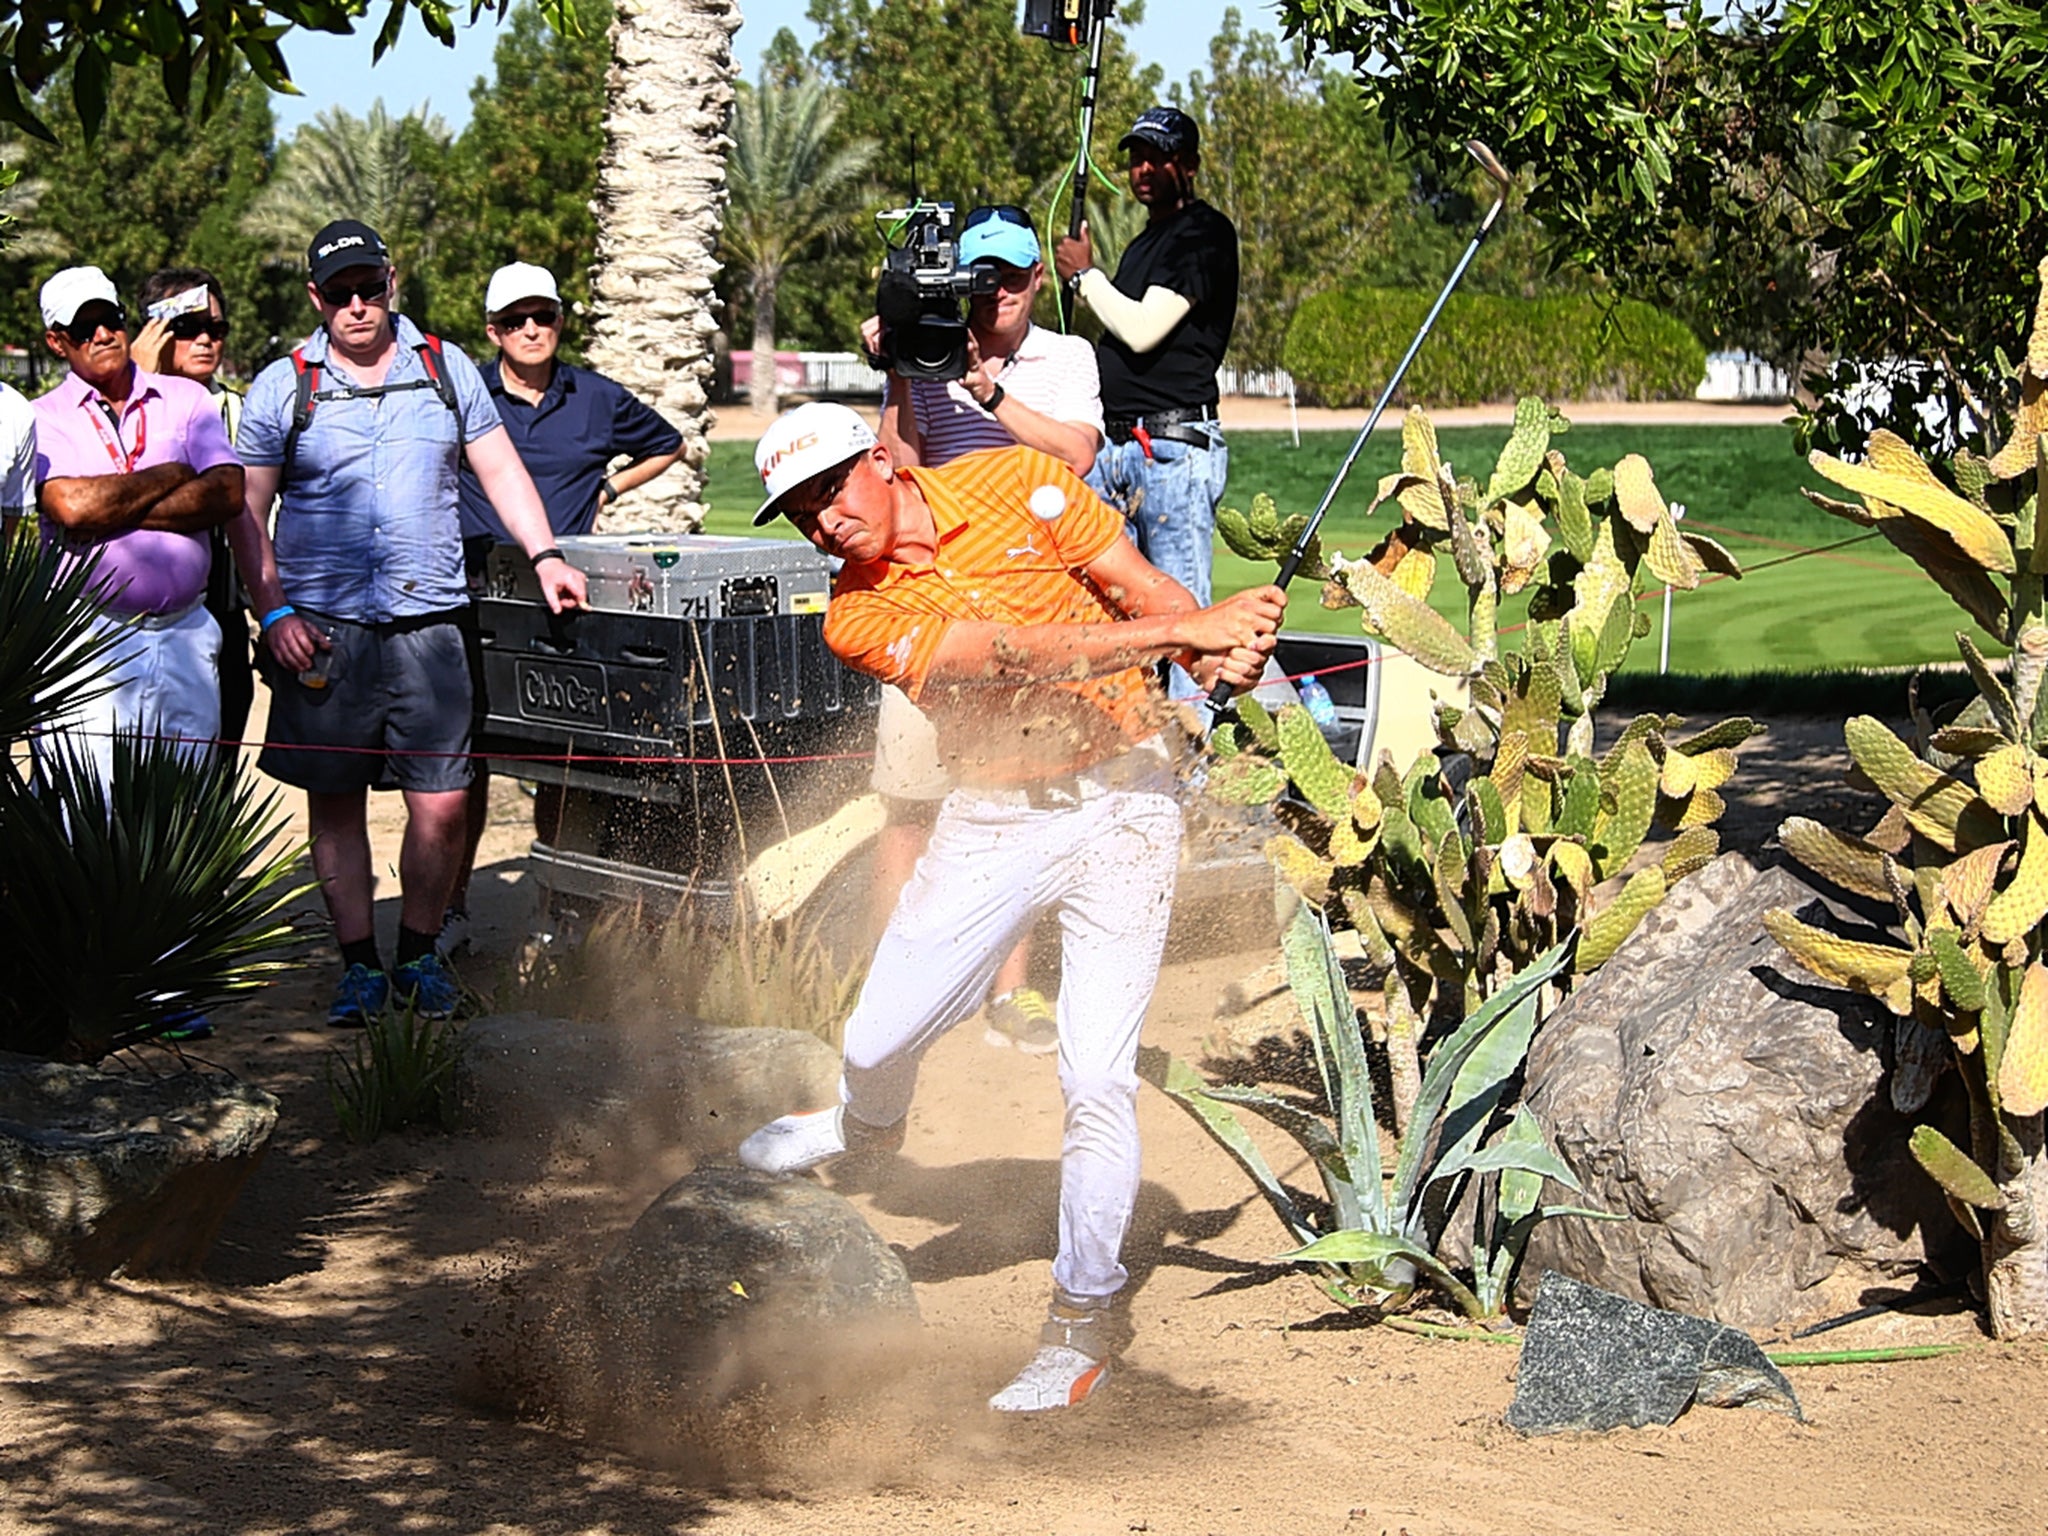 Rickie Fowler hits out of trouble on the seventh hole on his way to victory in the Abu Dhabi HSBC Championship yesterday